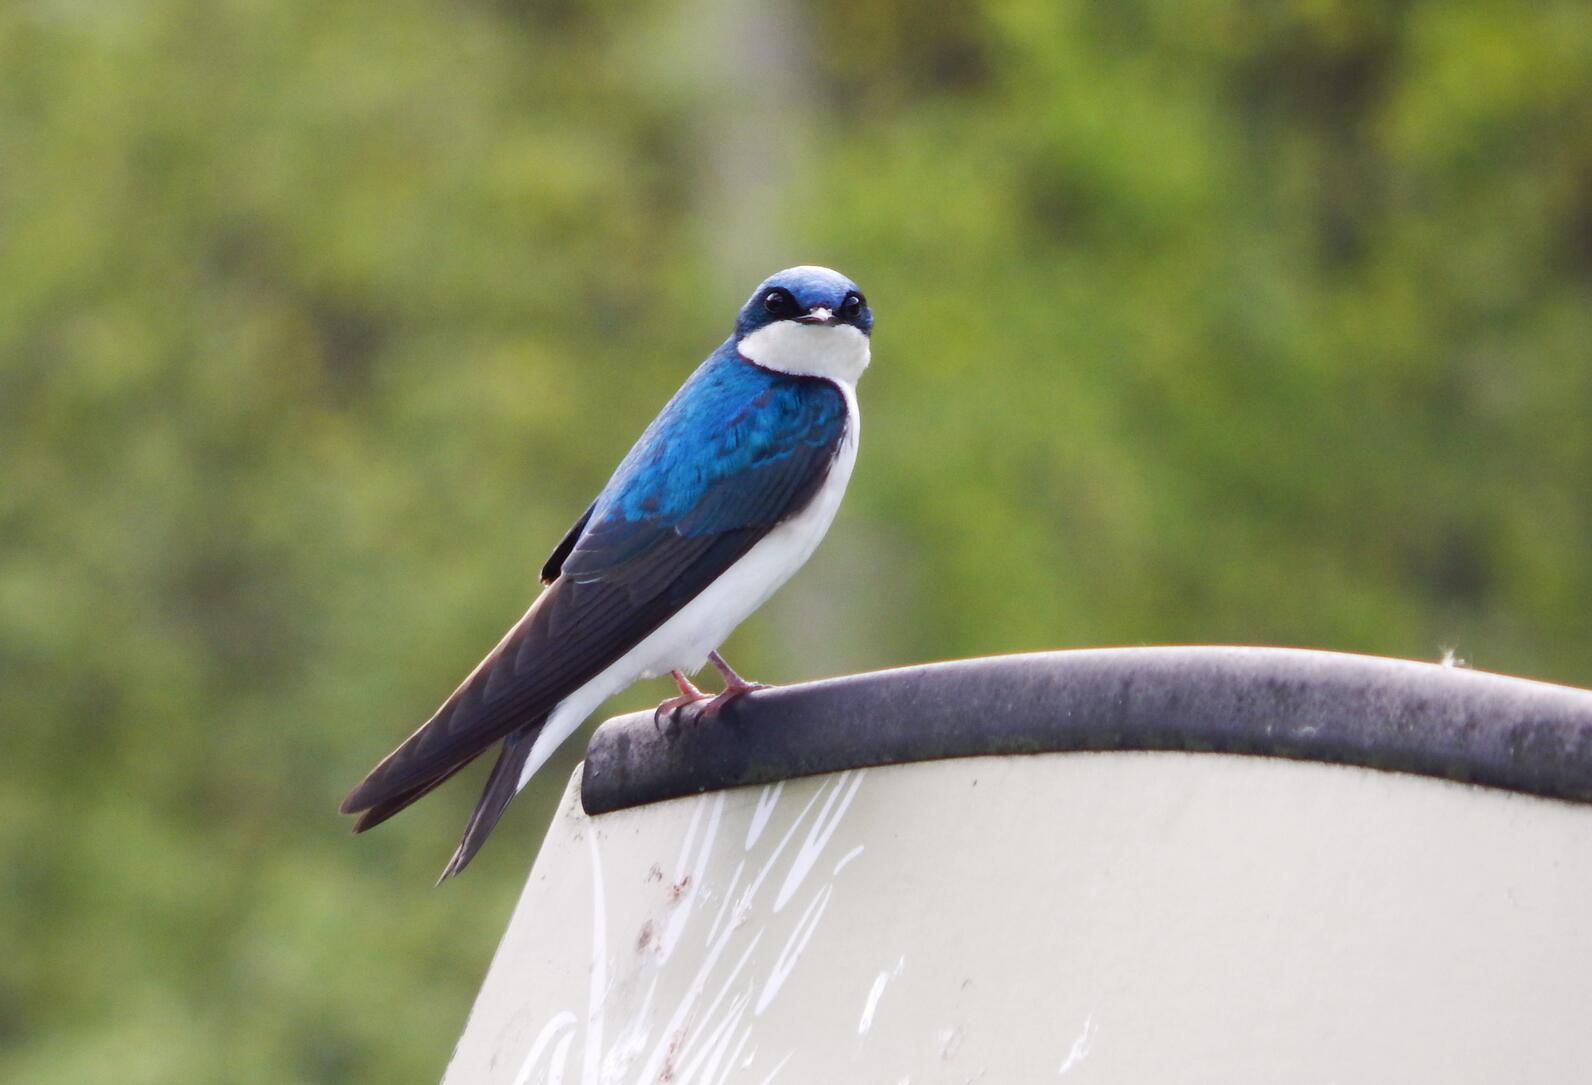 A Tree Swallow perched on top of an outdoor display sign, looking directly at the camera. 